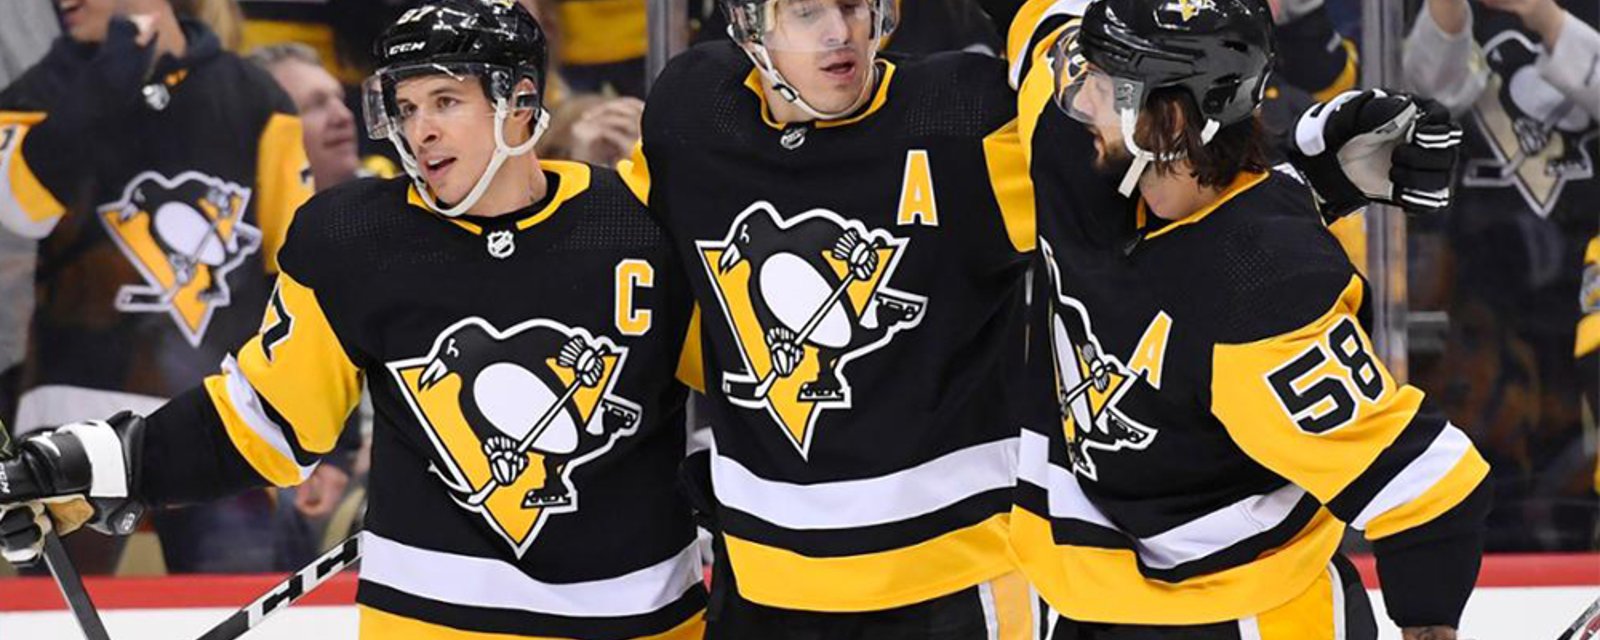 Penguins GM Ron Hextall discusses Crosby, Malkin, and future of the team 